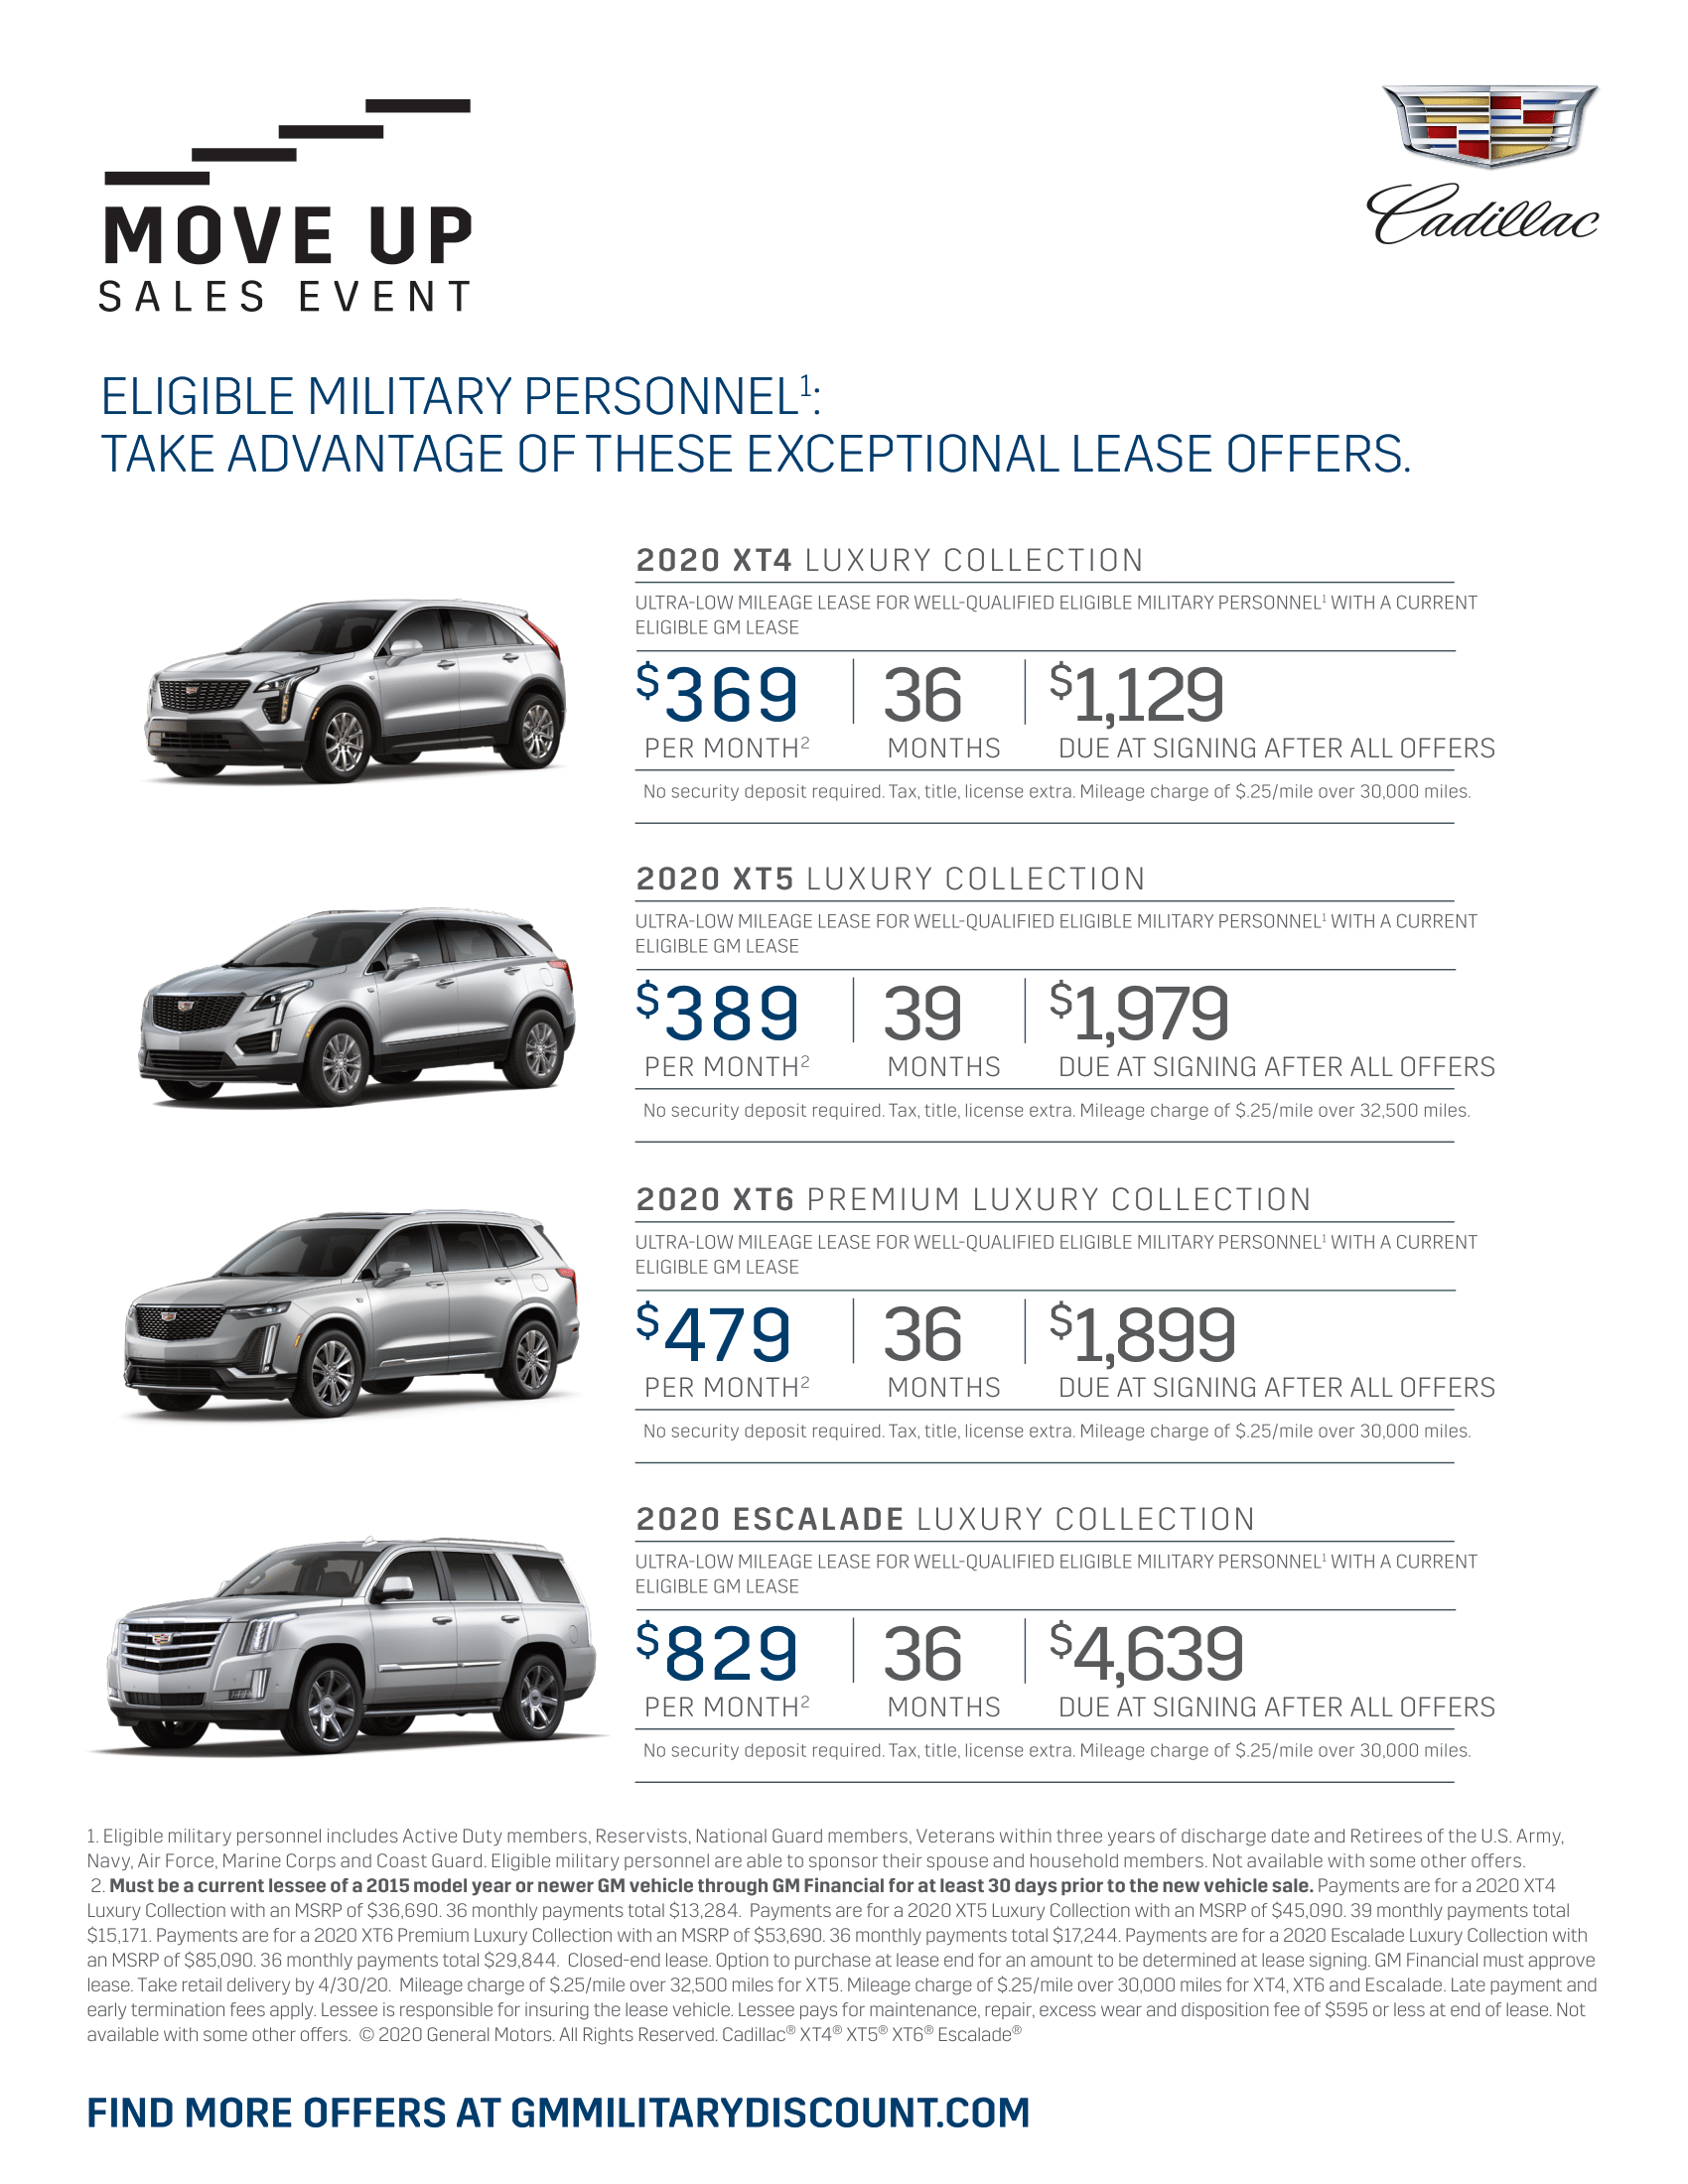 cadillac-military-discount